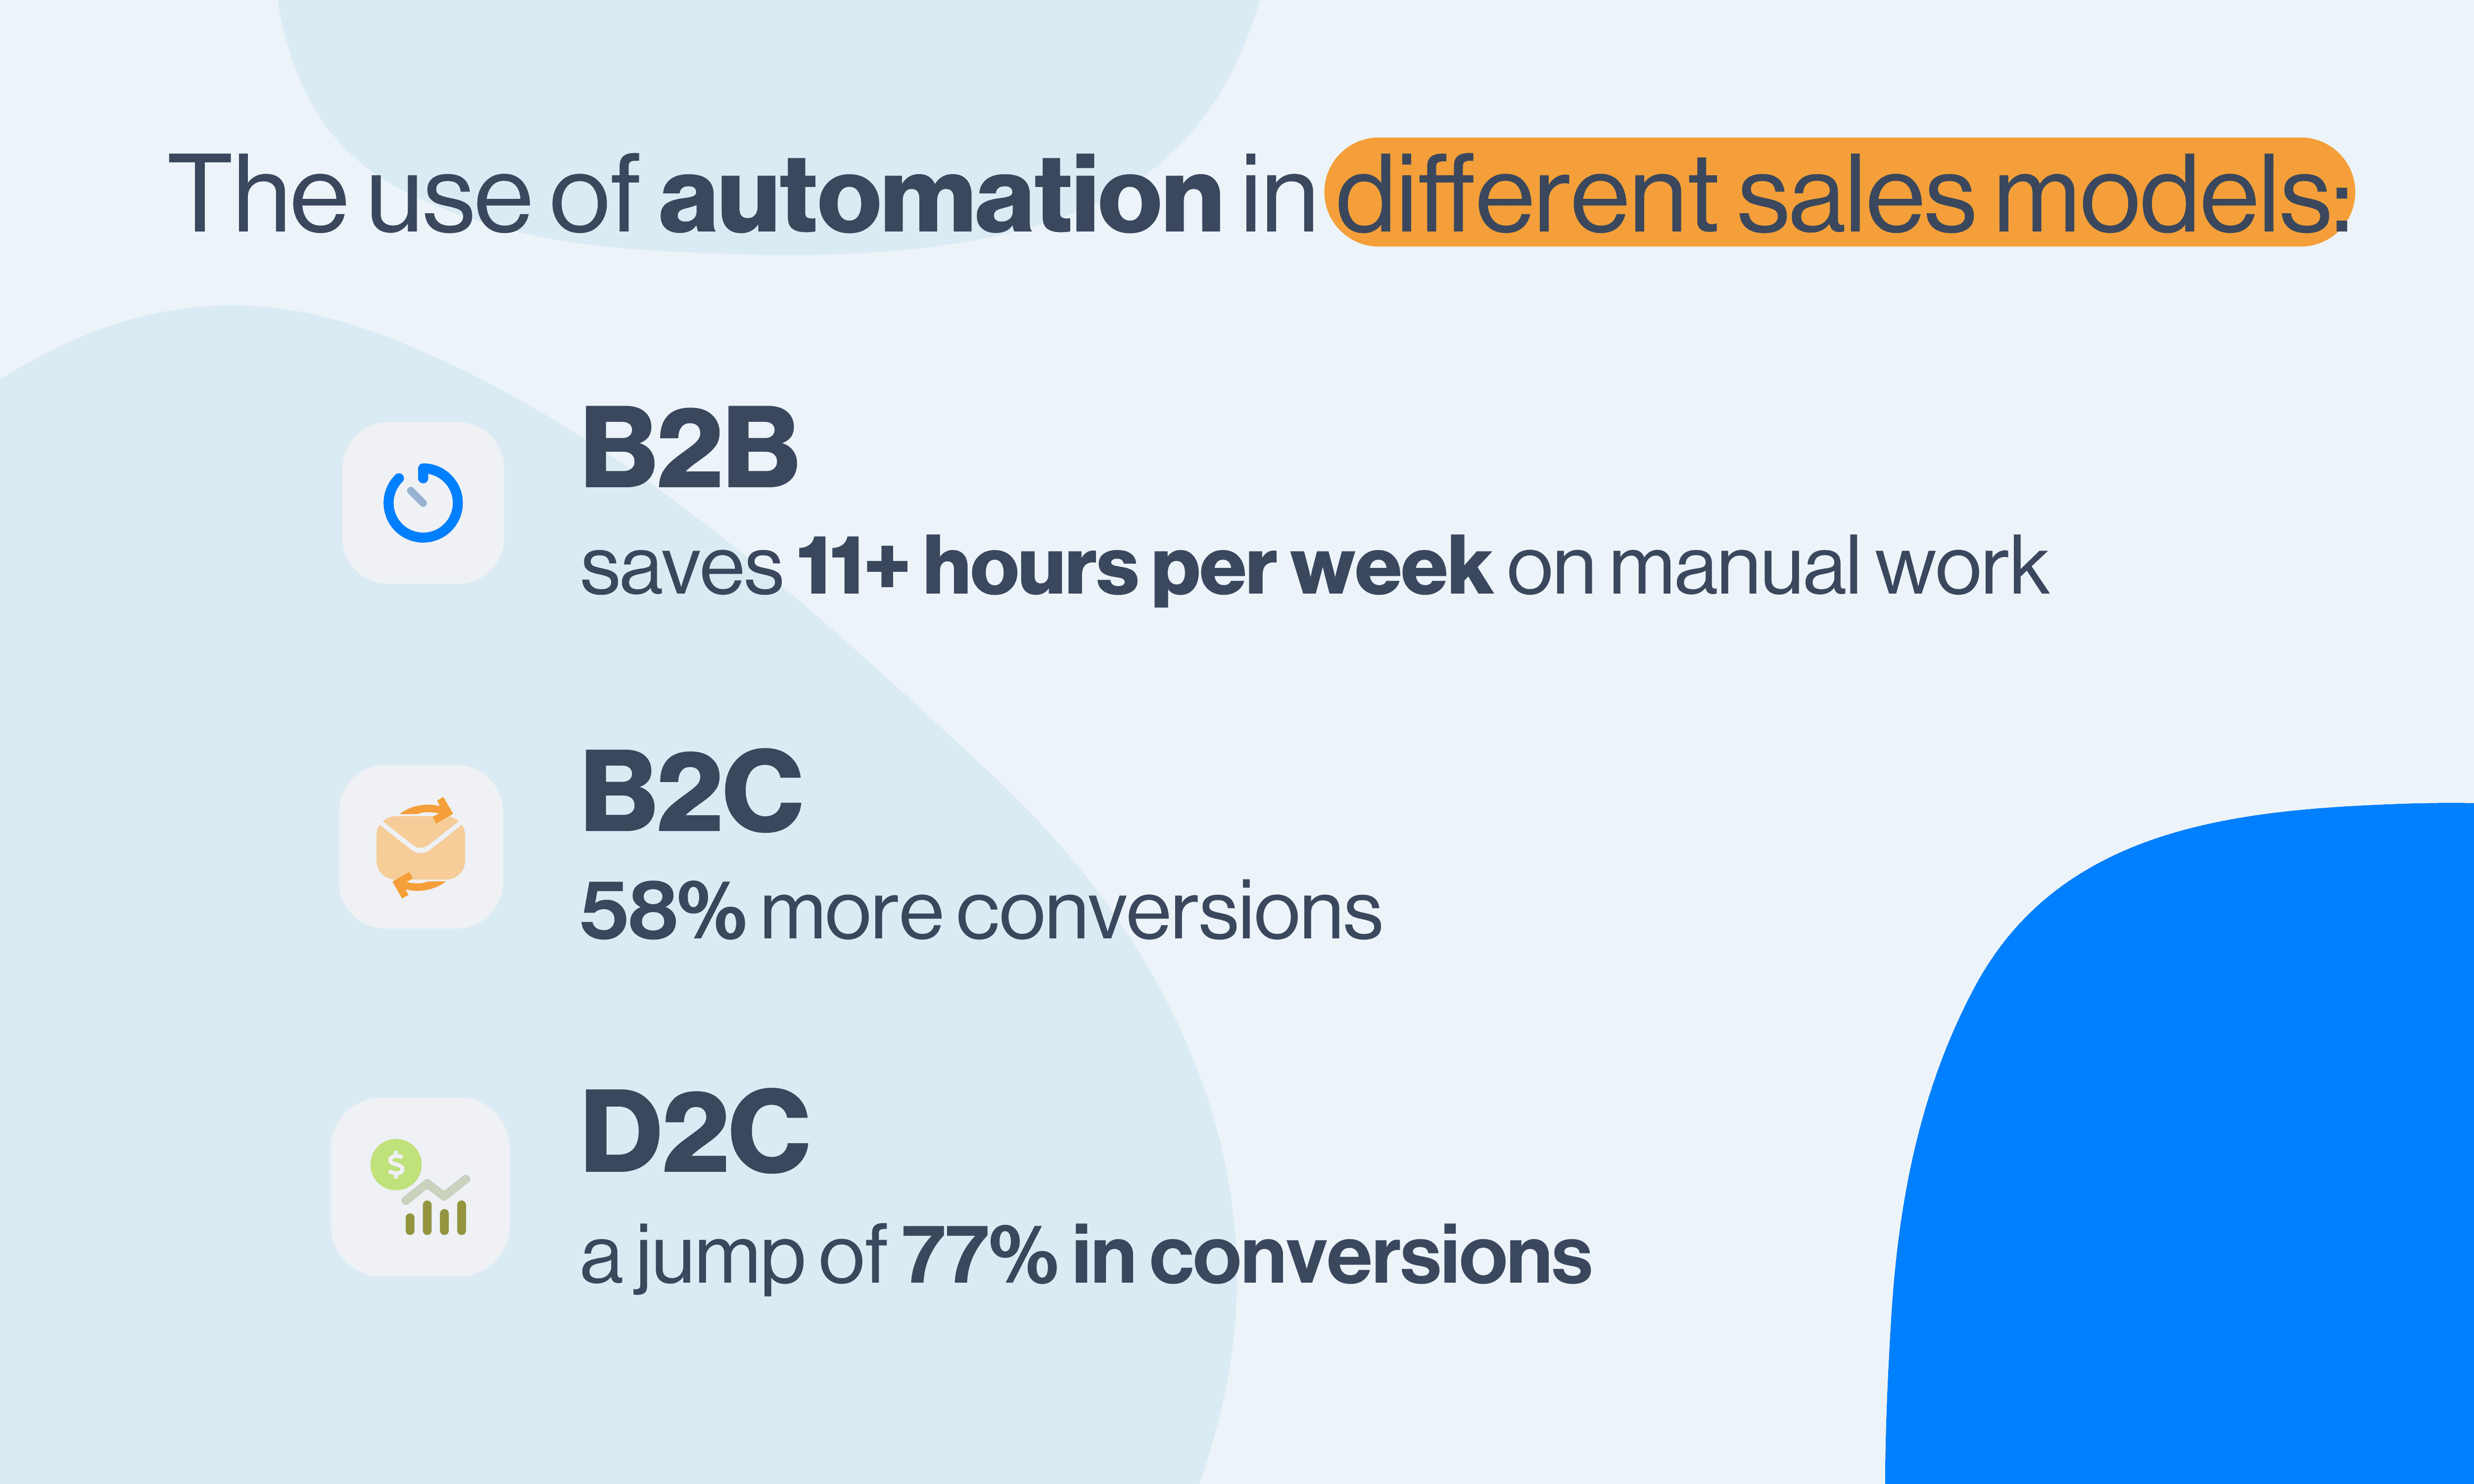 This images depicts different sales models and the percentage of using automation for each one of them